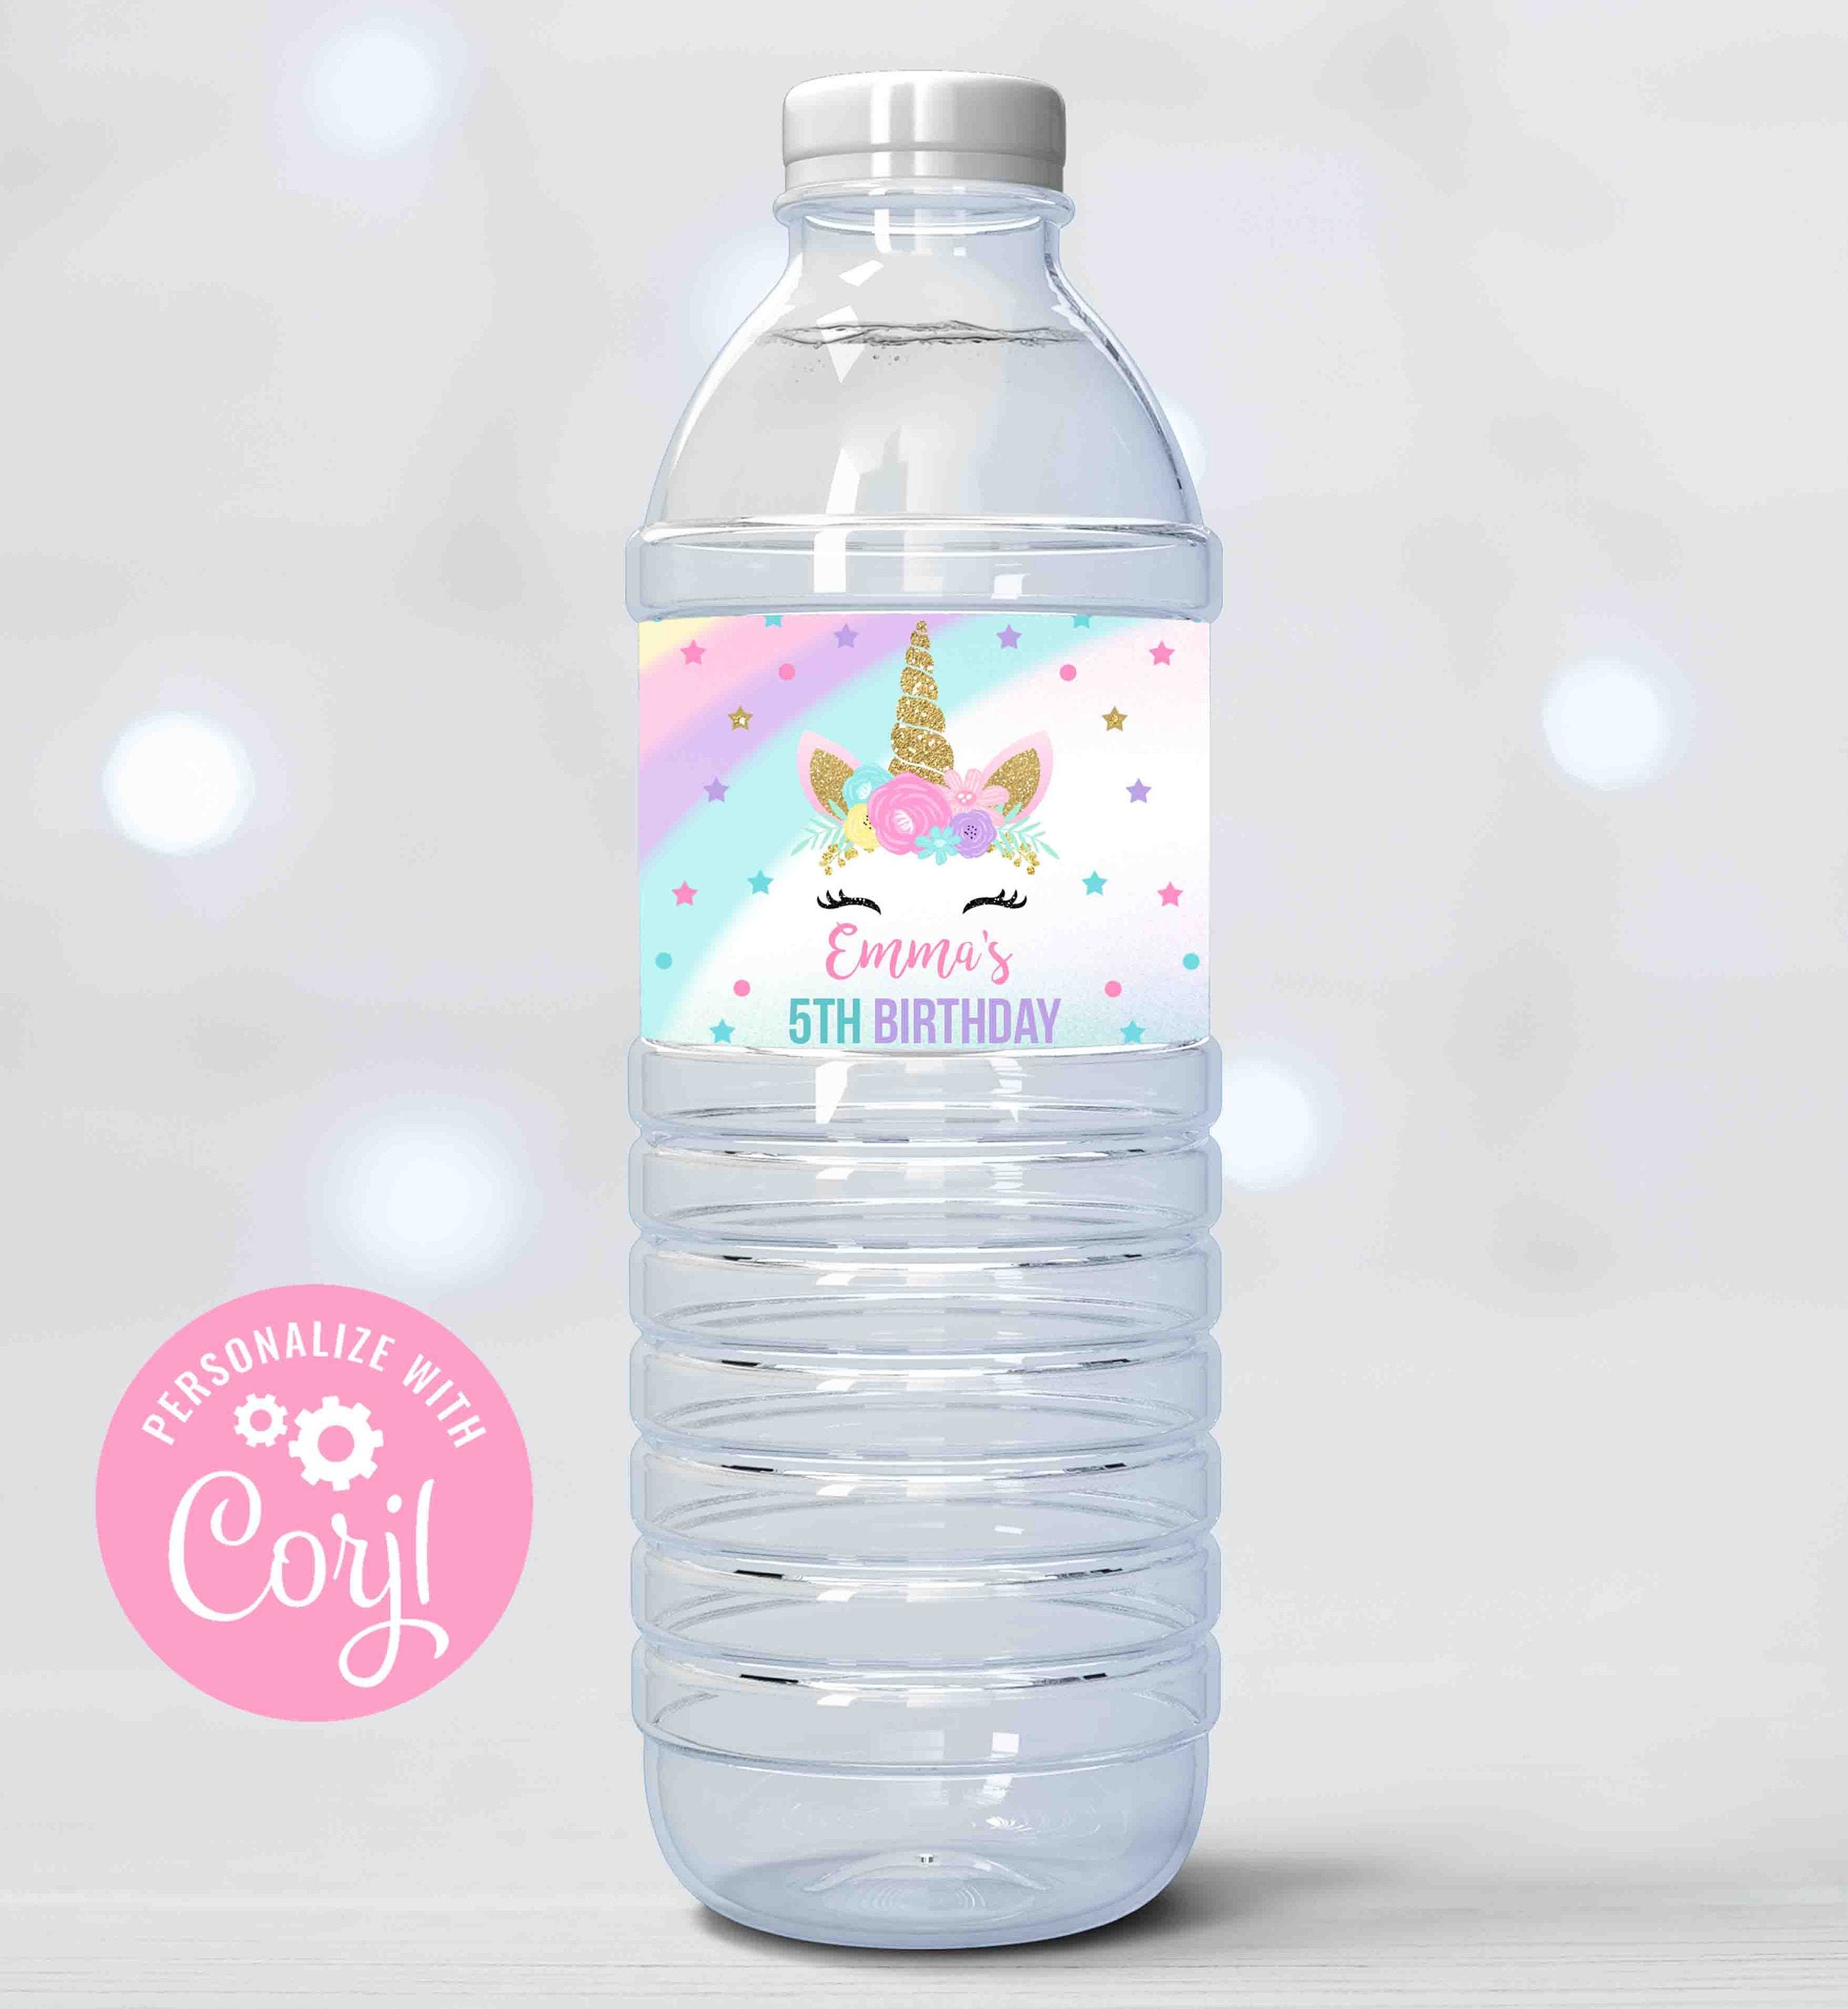  Unicorn Water Bottles for Girls Personalized Water Bottles for  Kids, Decorate Your Own Water Bottle Baseball Cap with 18 Sheets of Unicorn  Stickers and Glitter Gems Gifts for Girls 6-12 Year